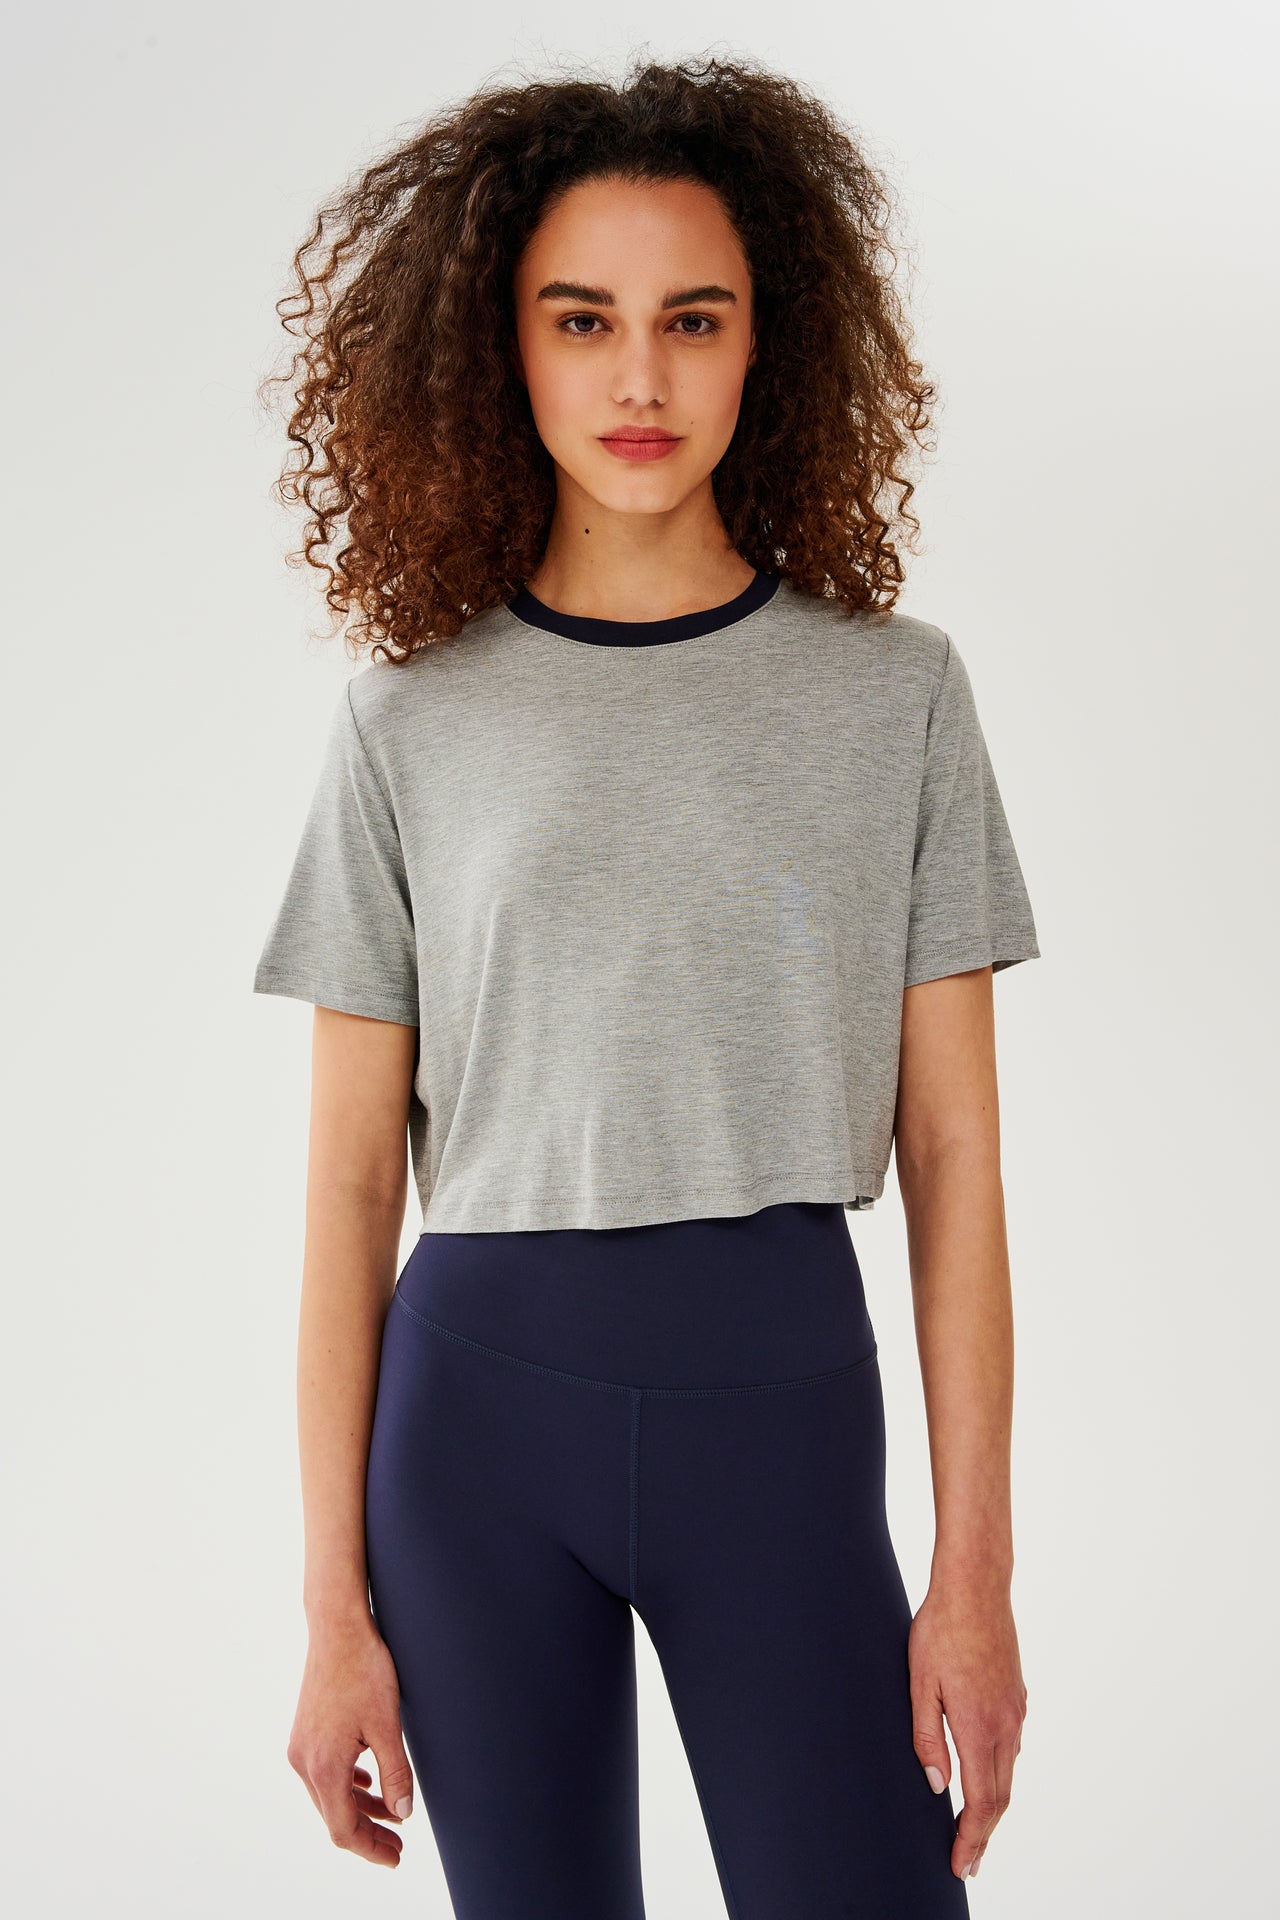 Front view of girl wearing  light grey cropped short sleeve t-shirt with thin dark blue neck hem and dark blue leggings 